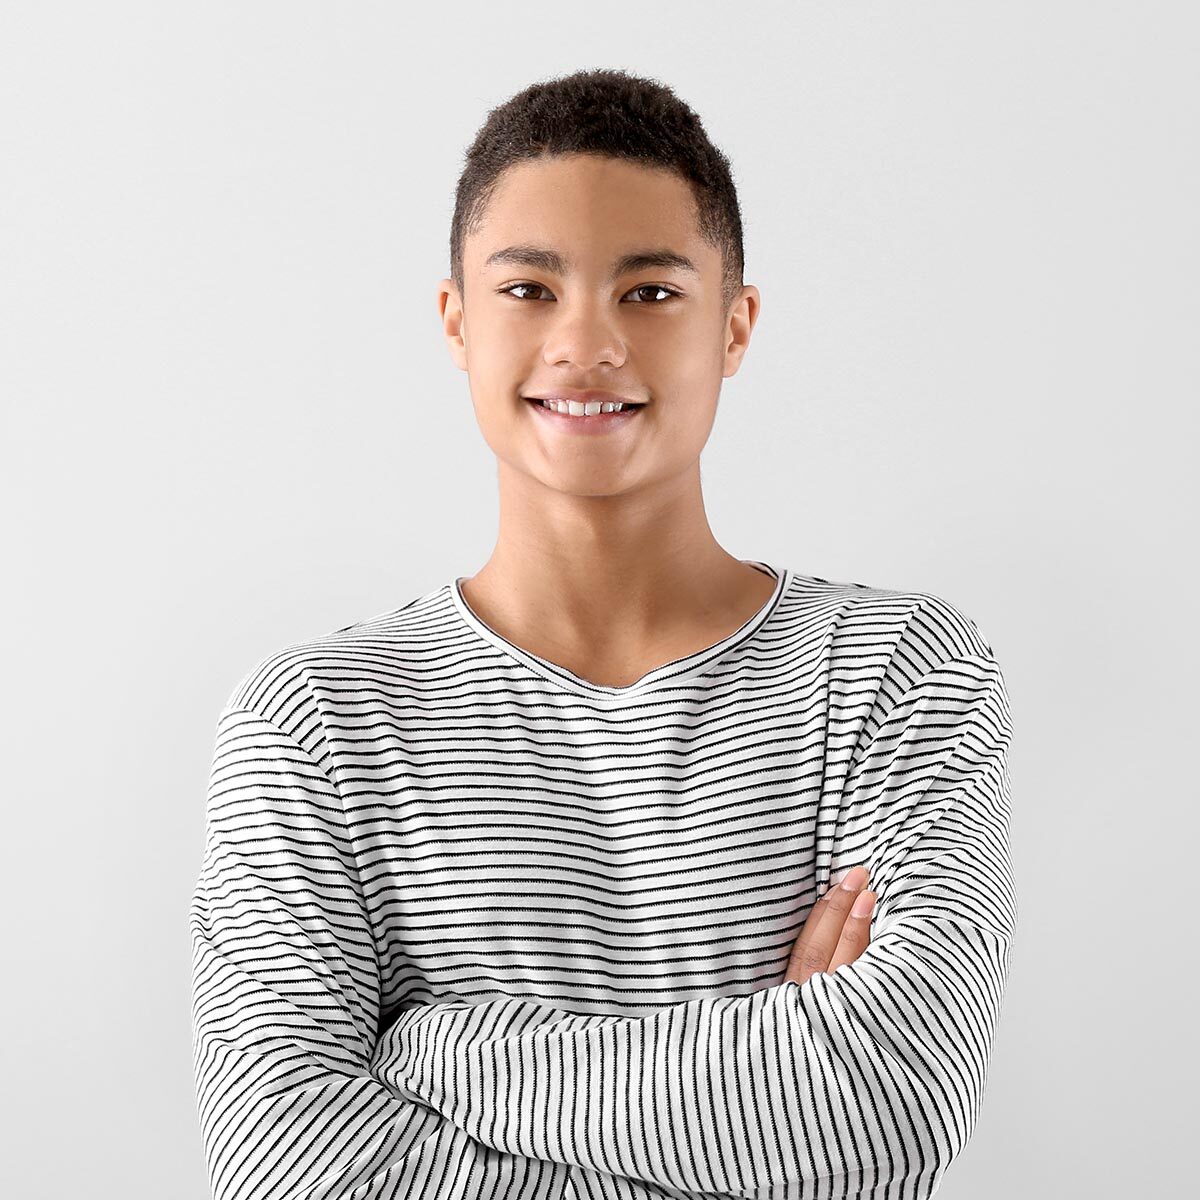 Teenage boy with short hair smiling in a striped long-sleeve shirt, arms crossed.